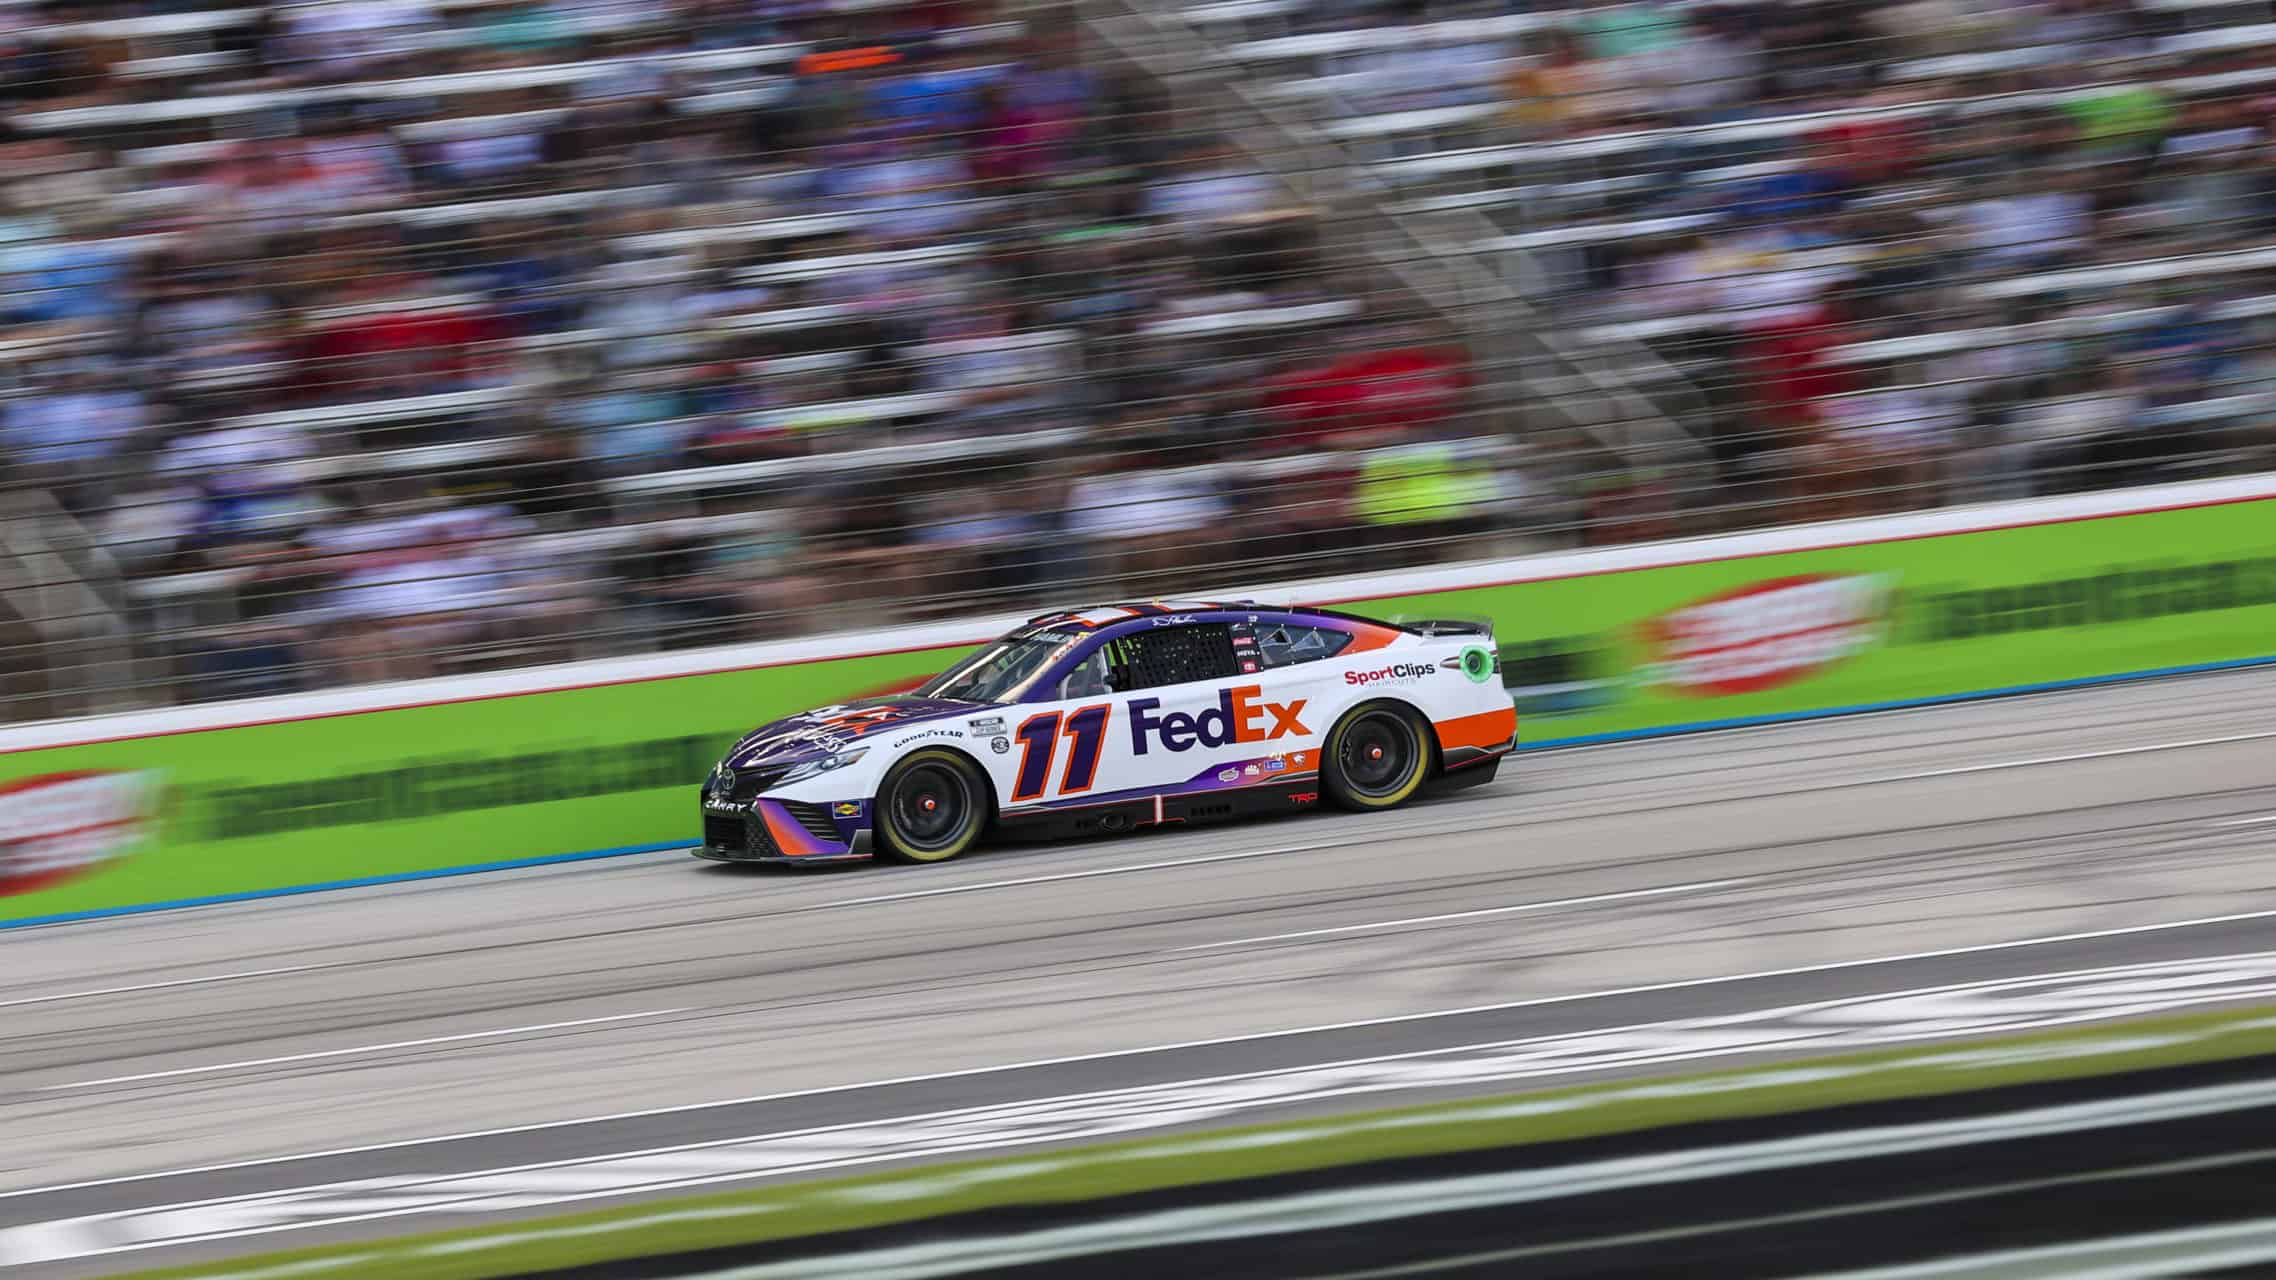 Denny Hamlin finished second in the NASCAR All-Star Race at Texas Motor Speedway for Joe Gibbs Racing. Photo by Rachel Schuoler.